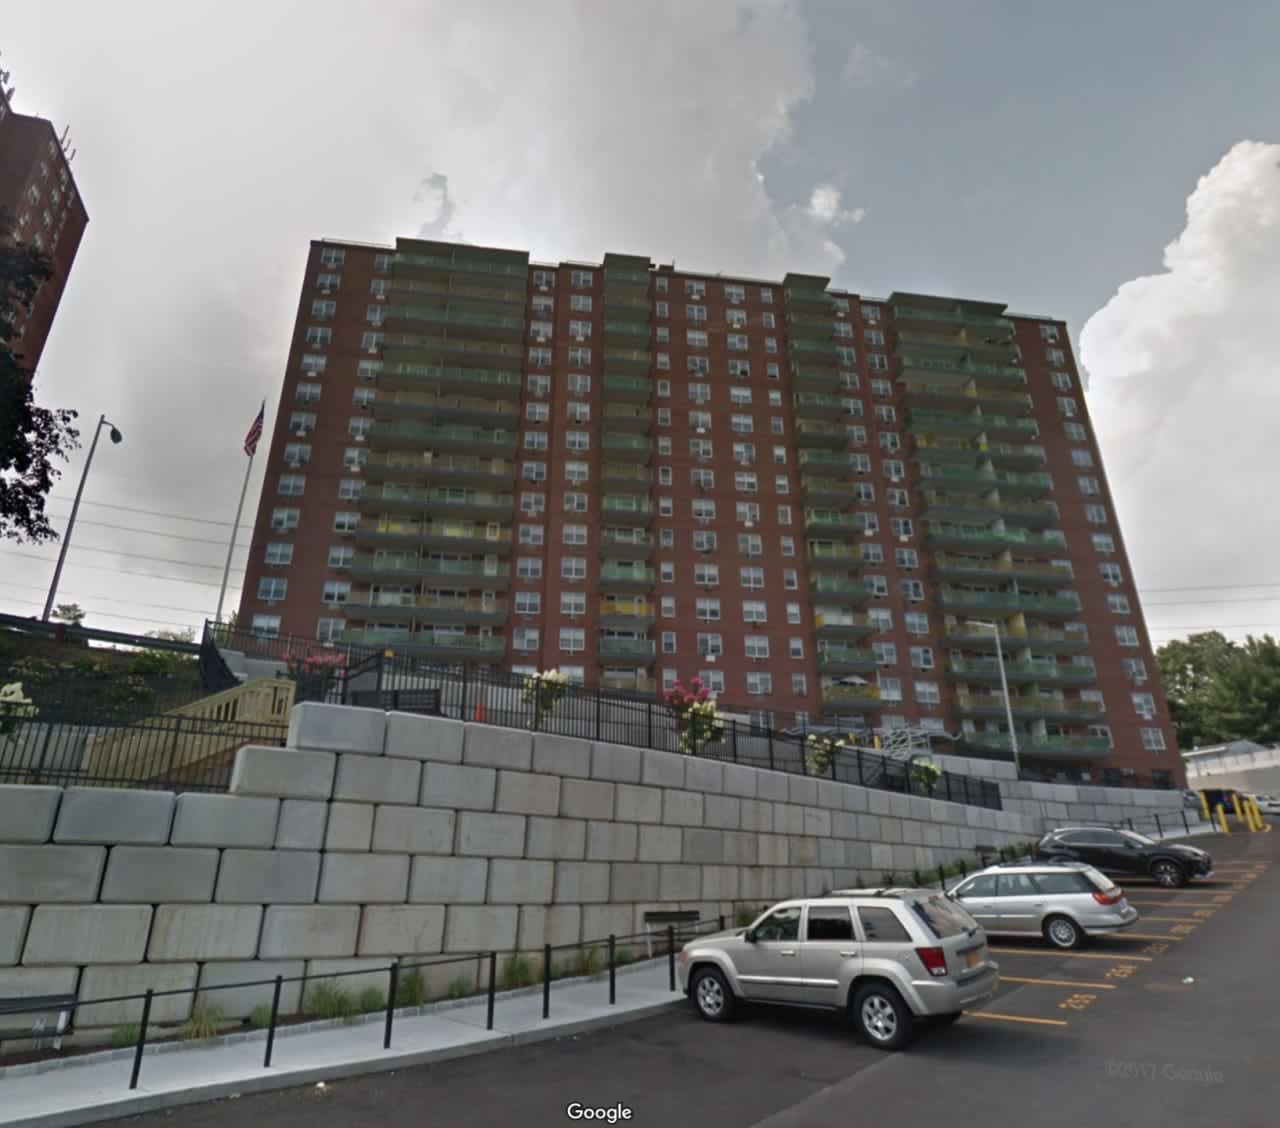 A fire broke out at a 19-story high rise in Yonkers.